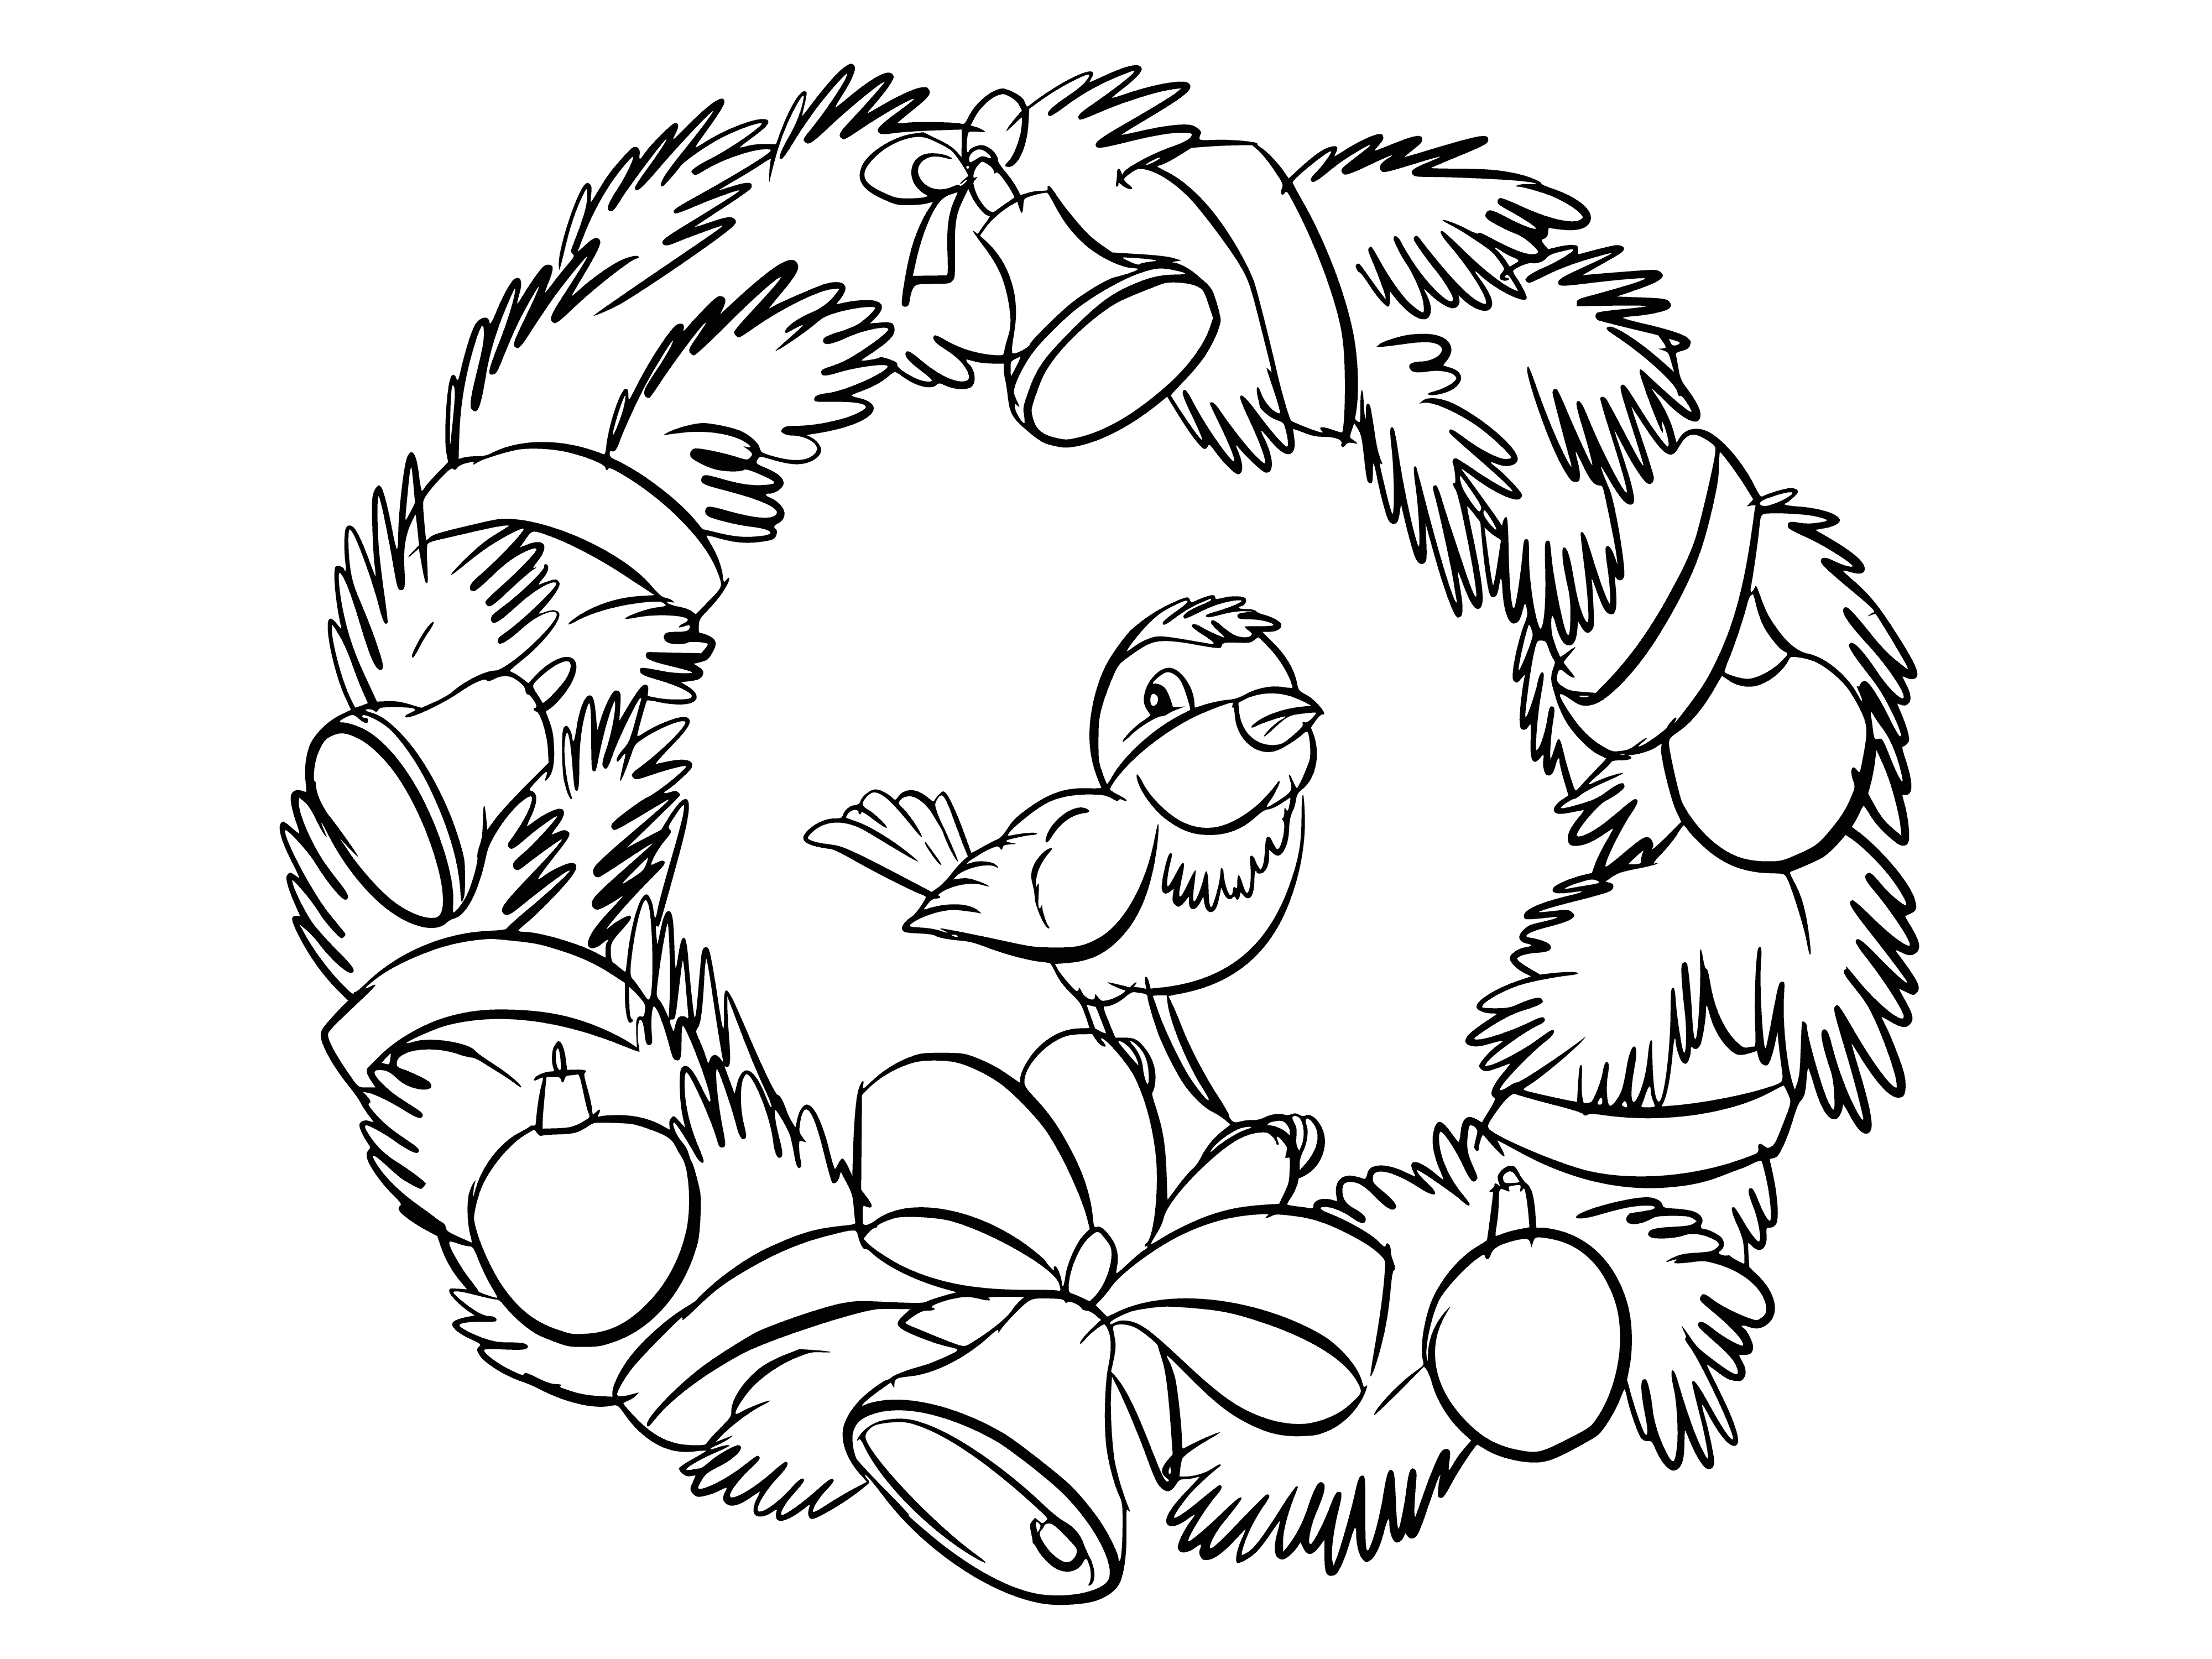 coloring page: A Christmas wreath: evergreen branches, leaves, ribbons, baubles - hung on a door/window as festive décor.